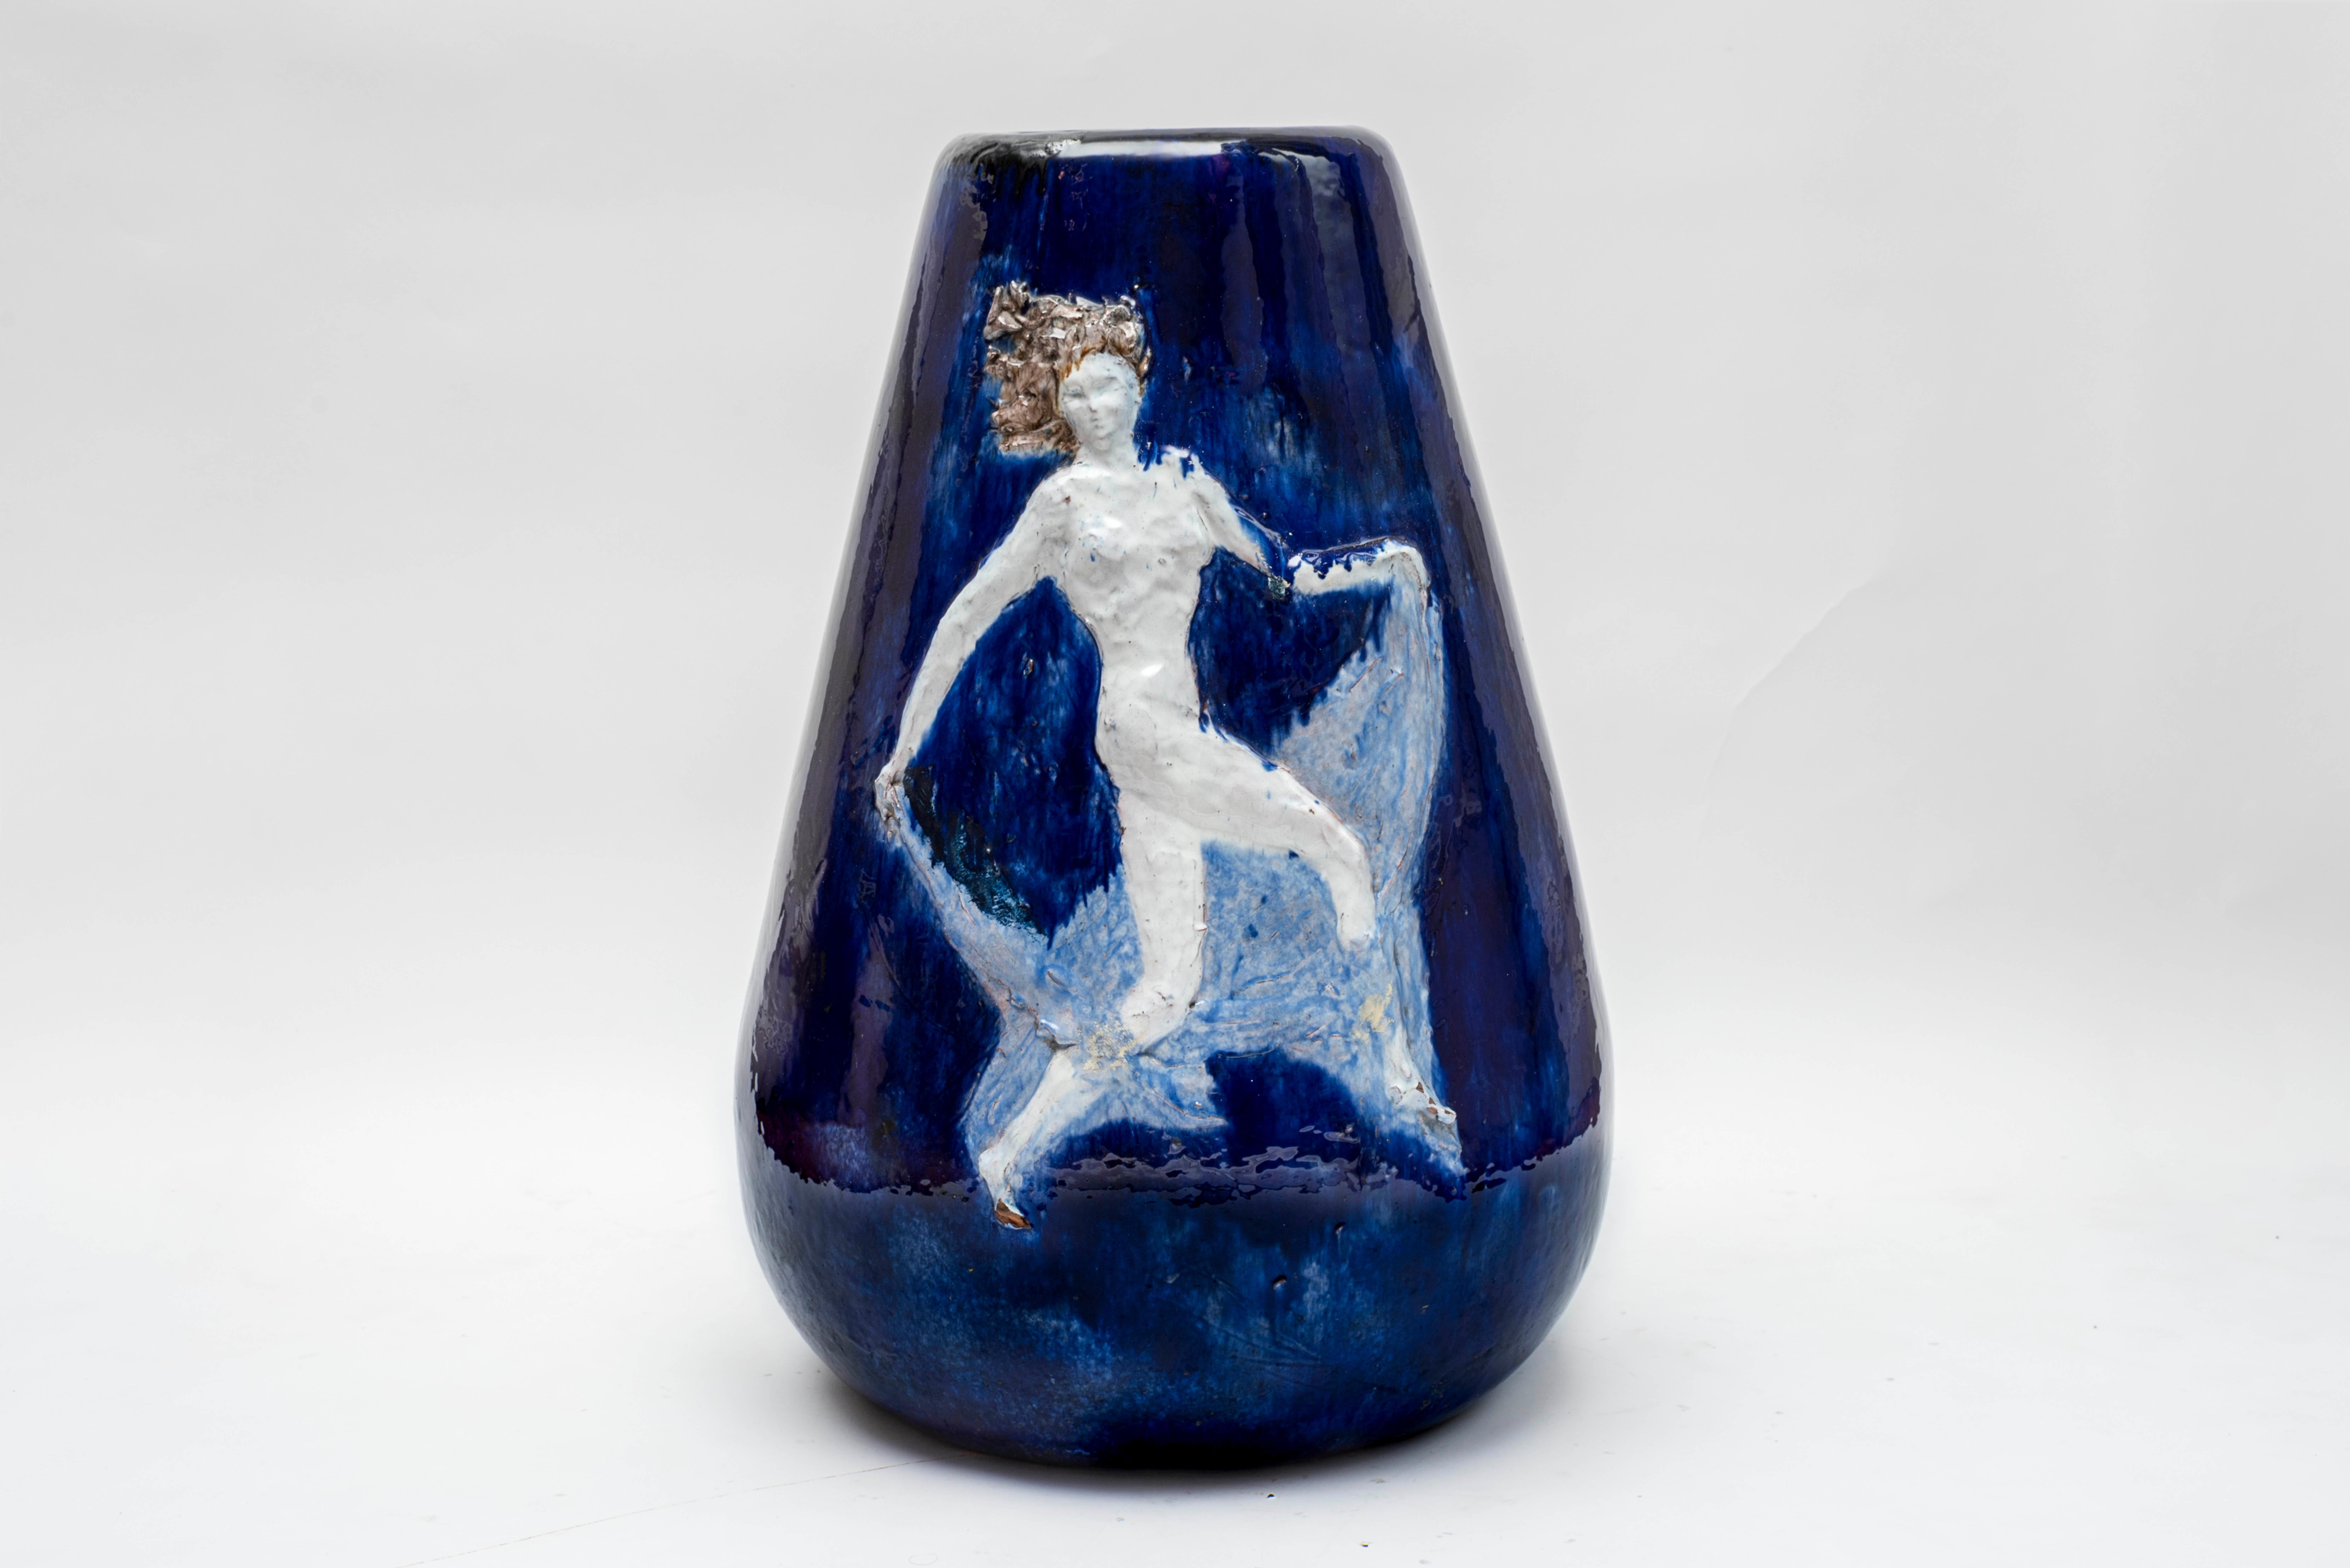 1930s ceramic vase showing a dancer
Good vintage condition
Few small imperfection due to Heat in creation of large ceramic piece
Signed
France or Italy,
circa 1930.